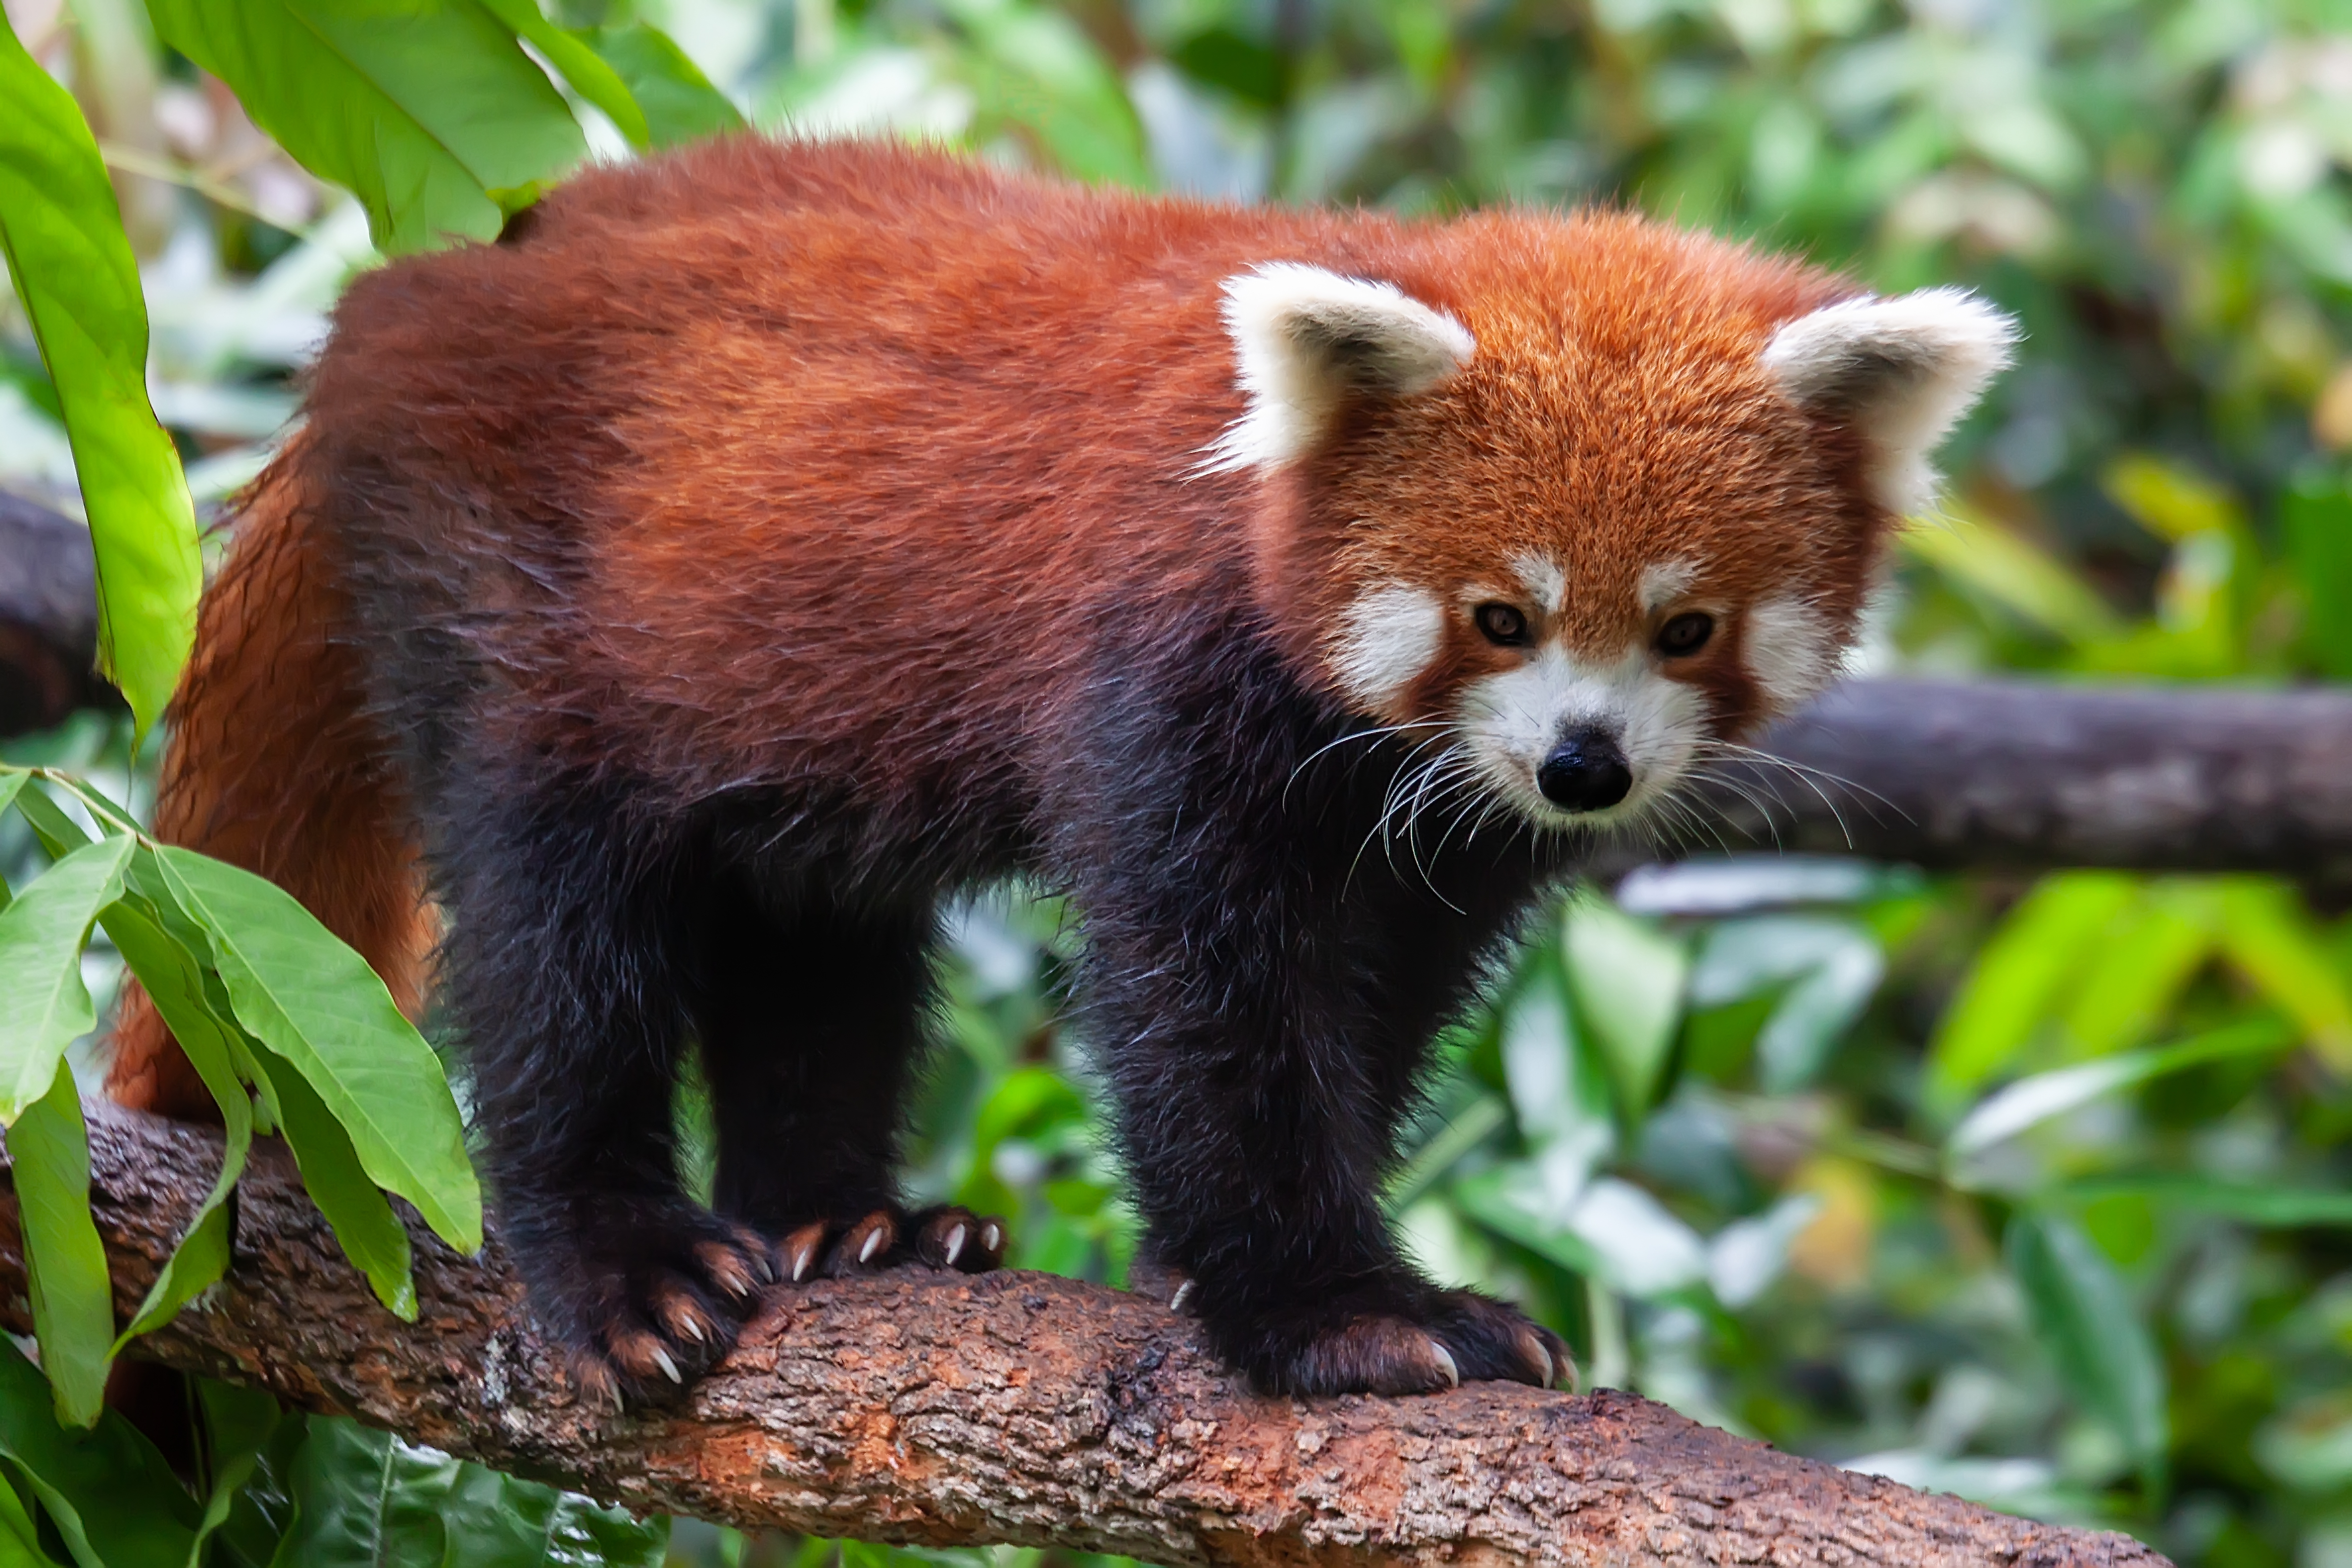 A red panda stands on a tree branch